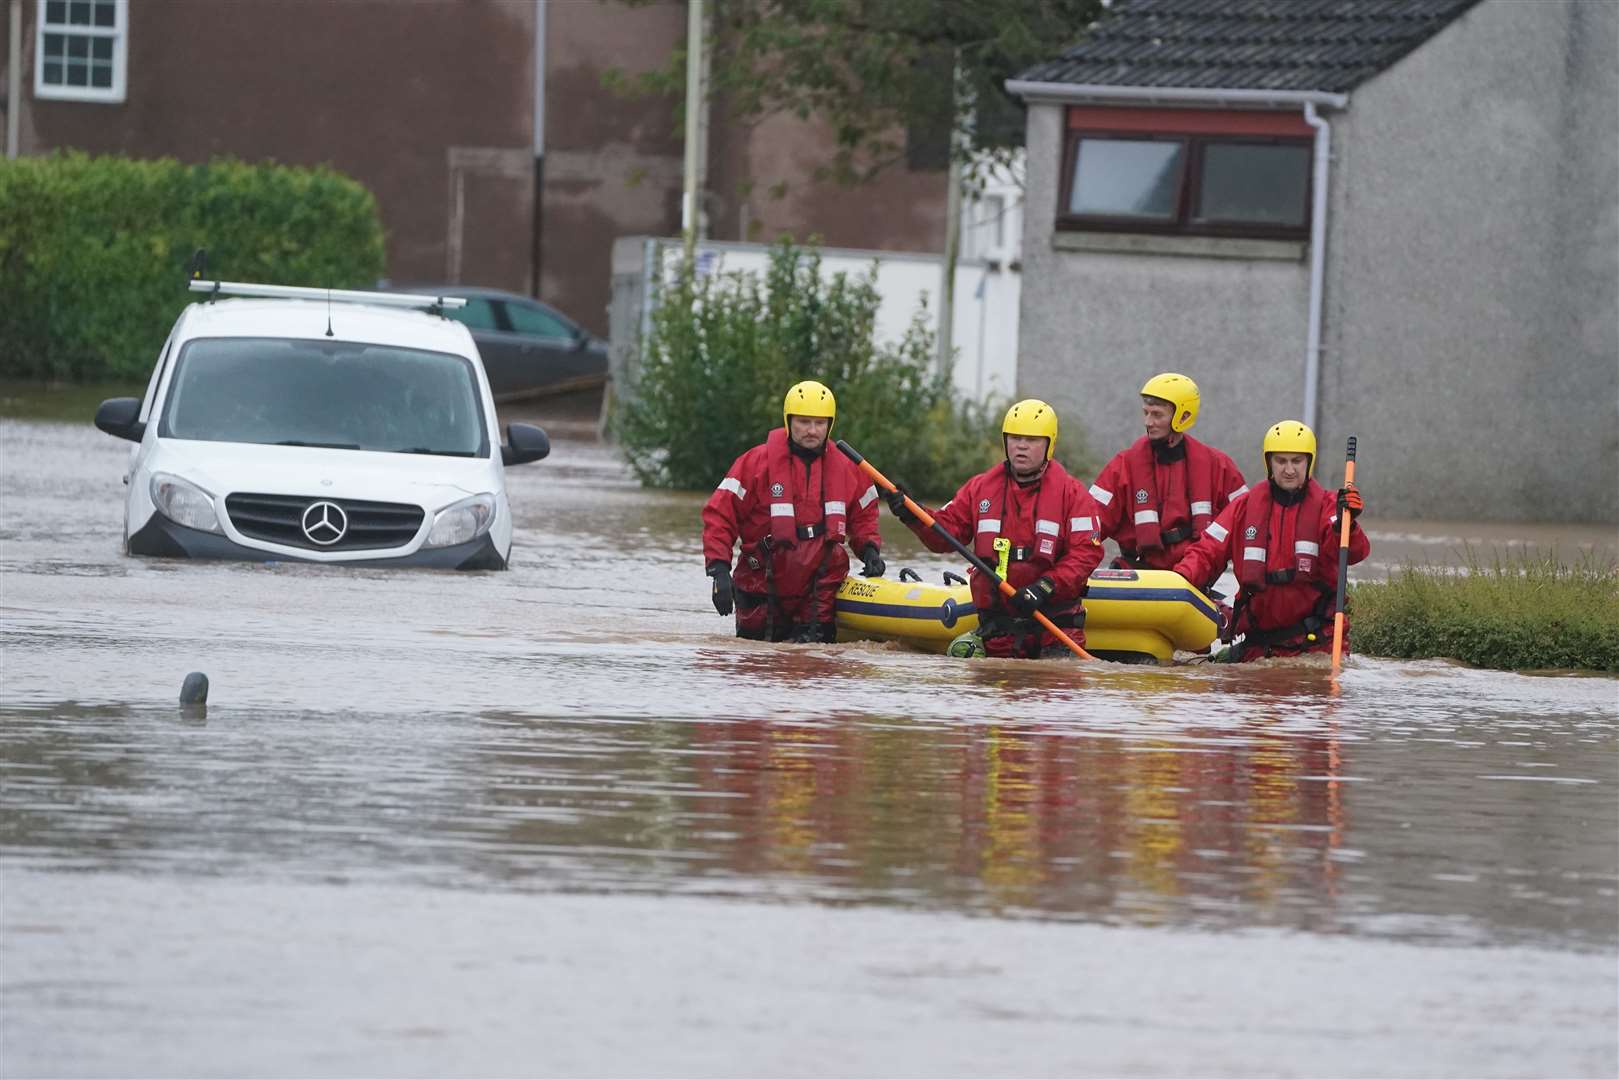 Members of a Coastguard rescue team wade through floodwaters in Brechin (Andrew Millgan/PA)